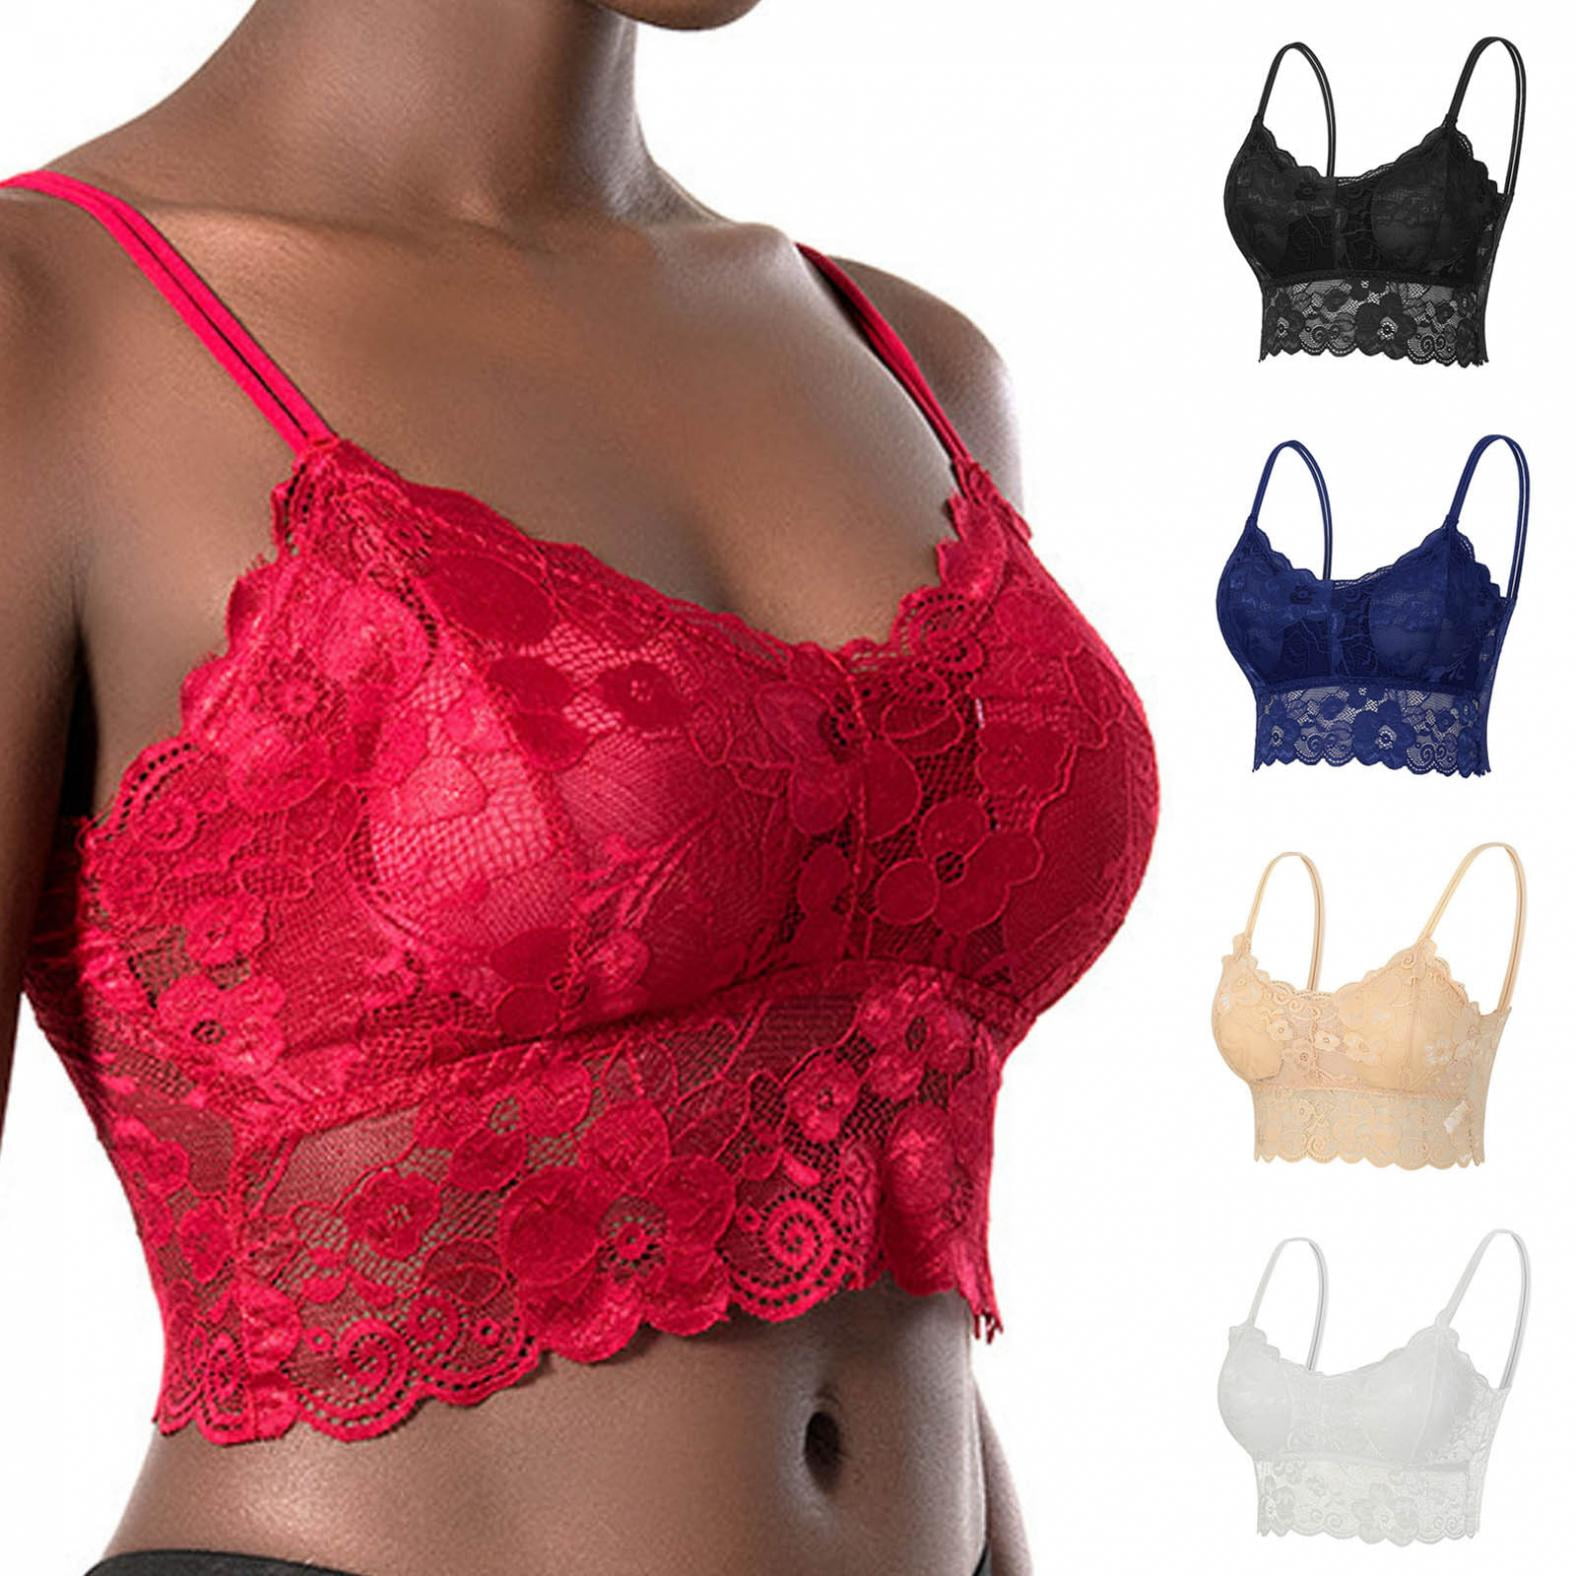 Snorda Lace Bralettes for Women, Fashion Woman's Lace Beauty Back